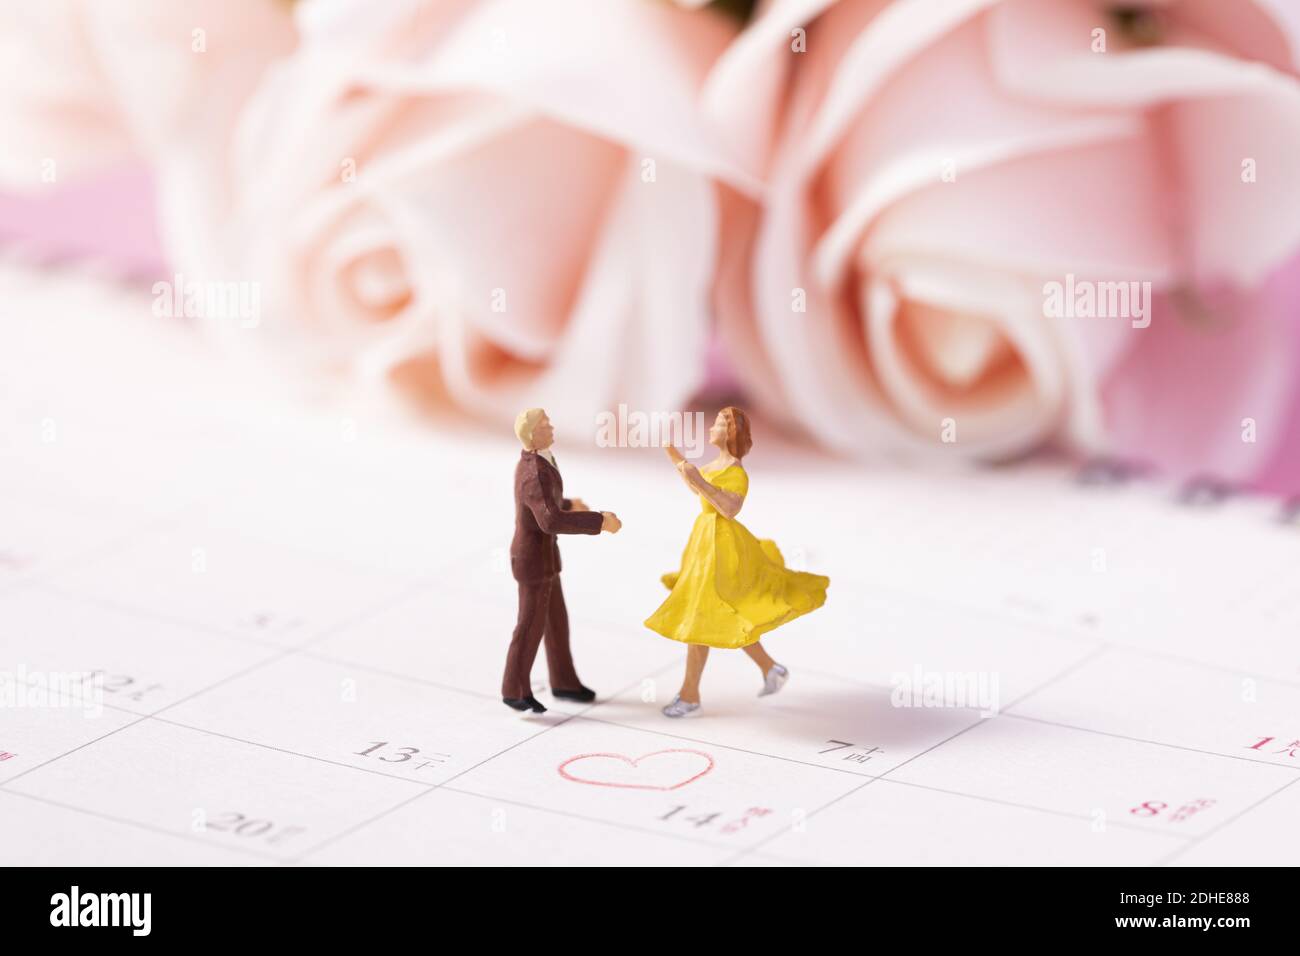 A creative shot of Valentine's day romantic doll dancing couple on ...